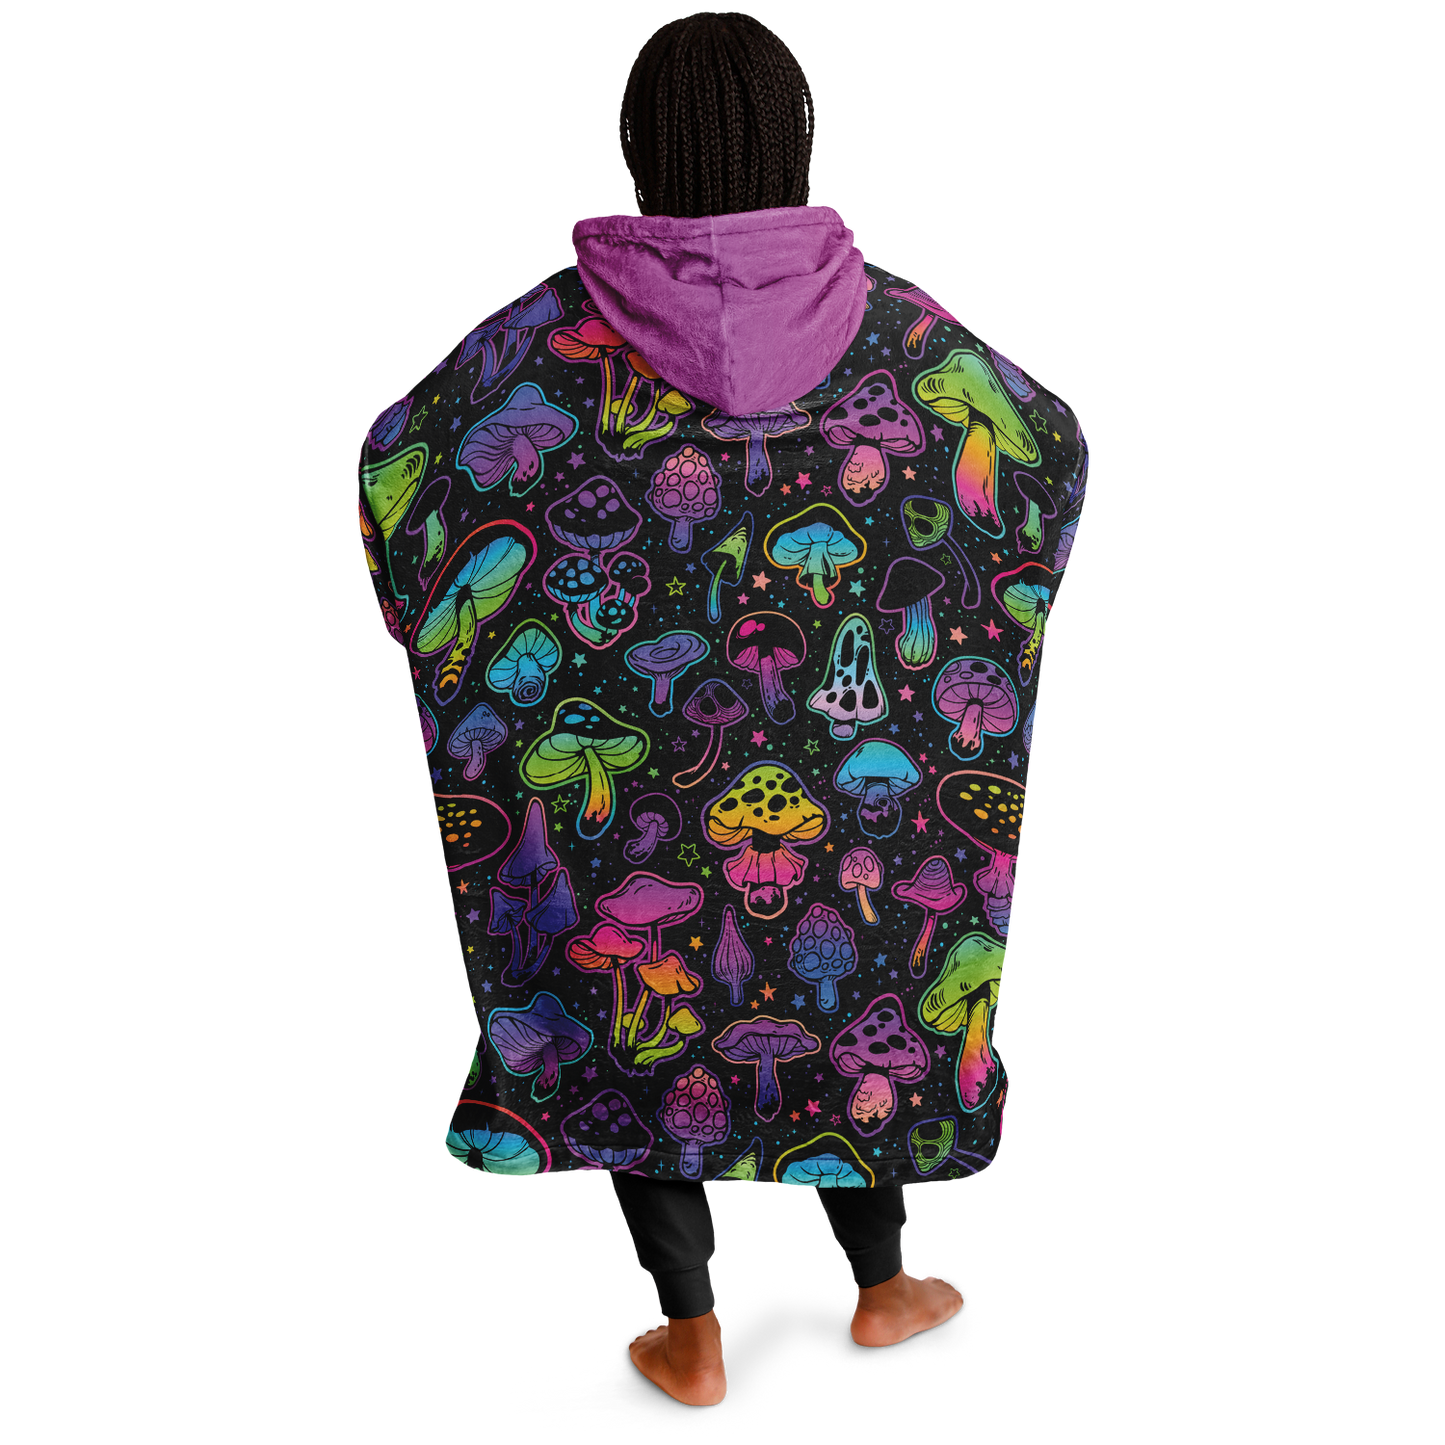 My Head is Spinnin' Super Hoodie - Available for a Strictly Limited Time - Buy 2 & Get FREE Shipping